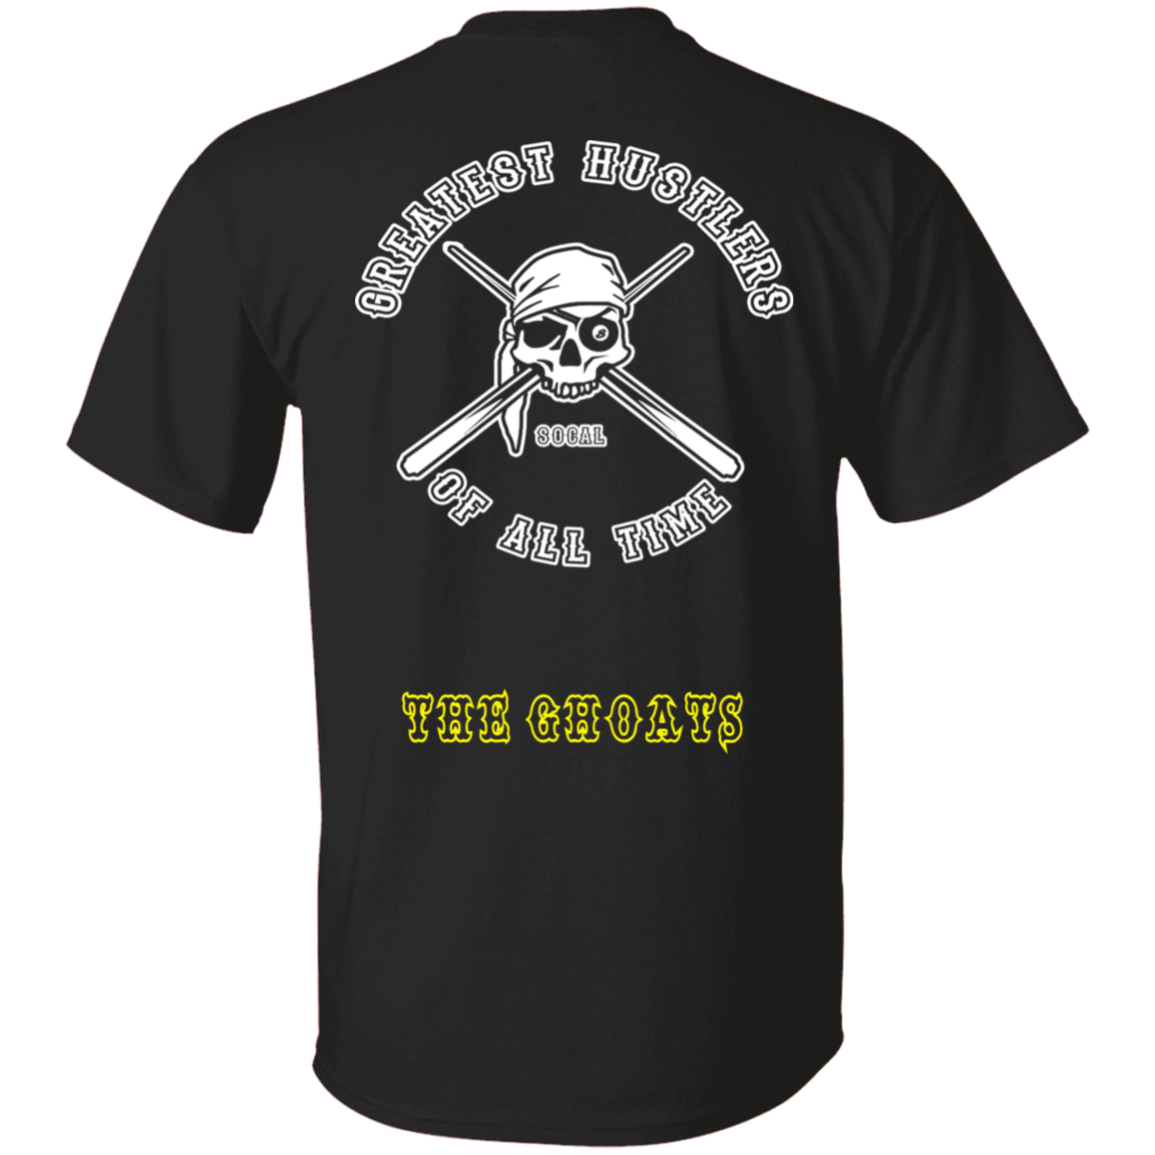 The GHOATS Custom Design. #4 Motorcycle Club Style. Ver 1/2. Basic Cotton T-Shirt